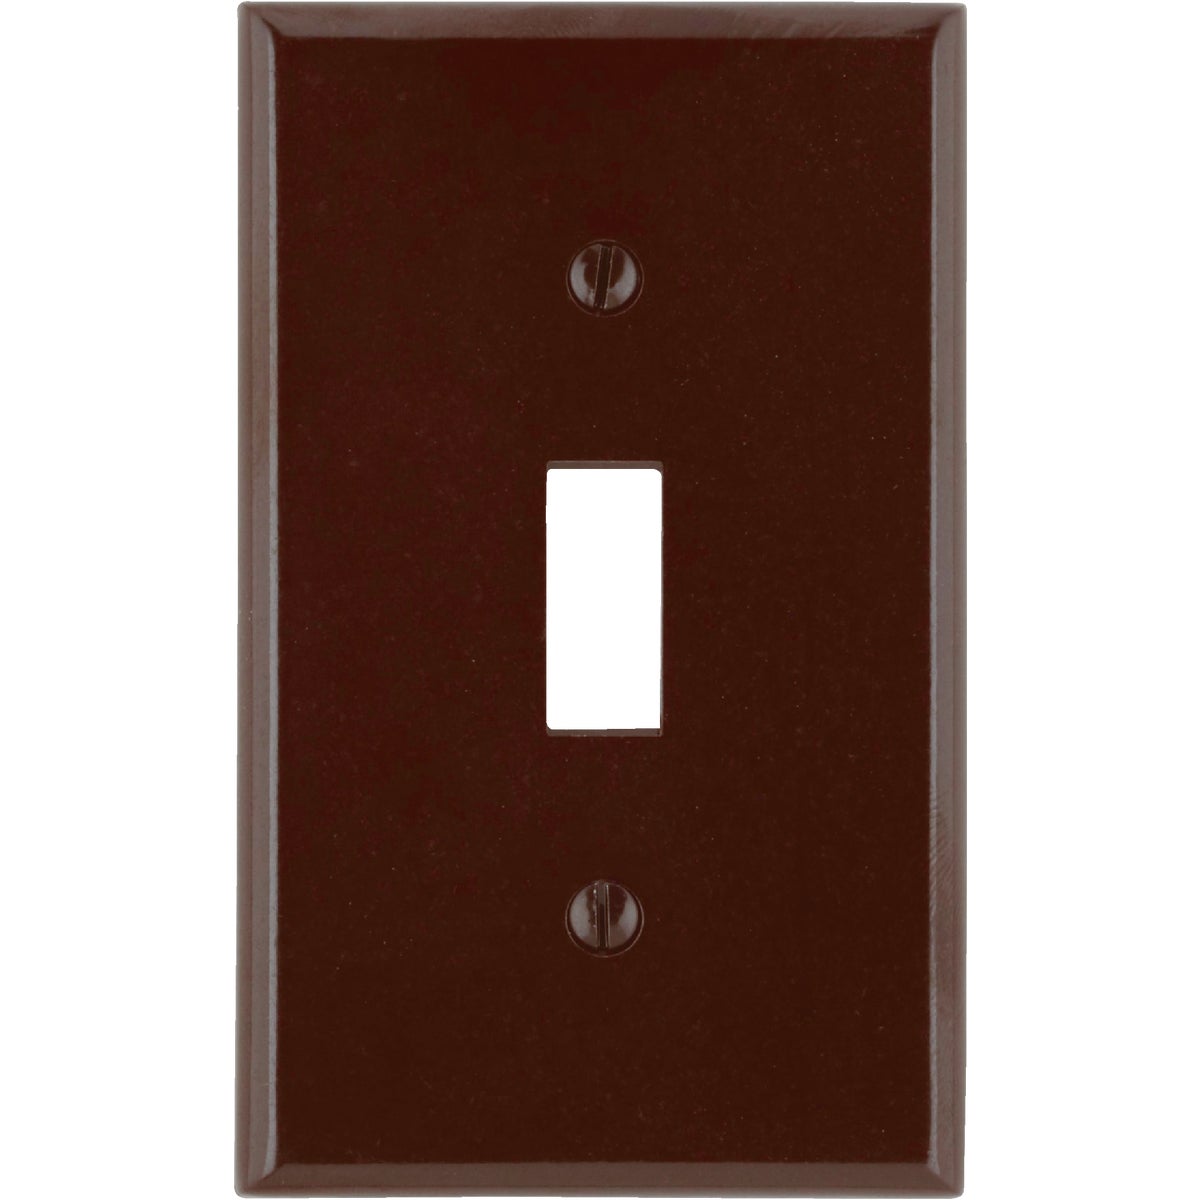 Item 525630, Smooth plastic, standard size wall plate. Durable, easy to clean design.